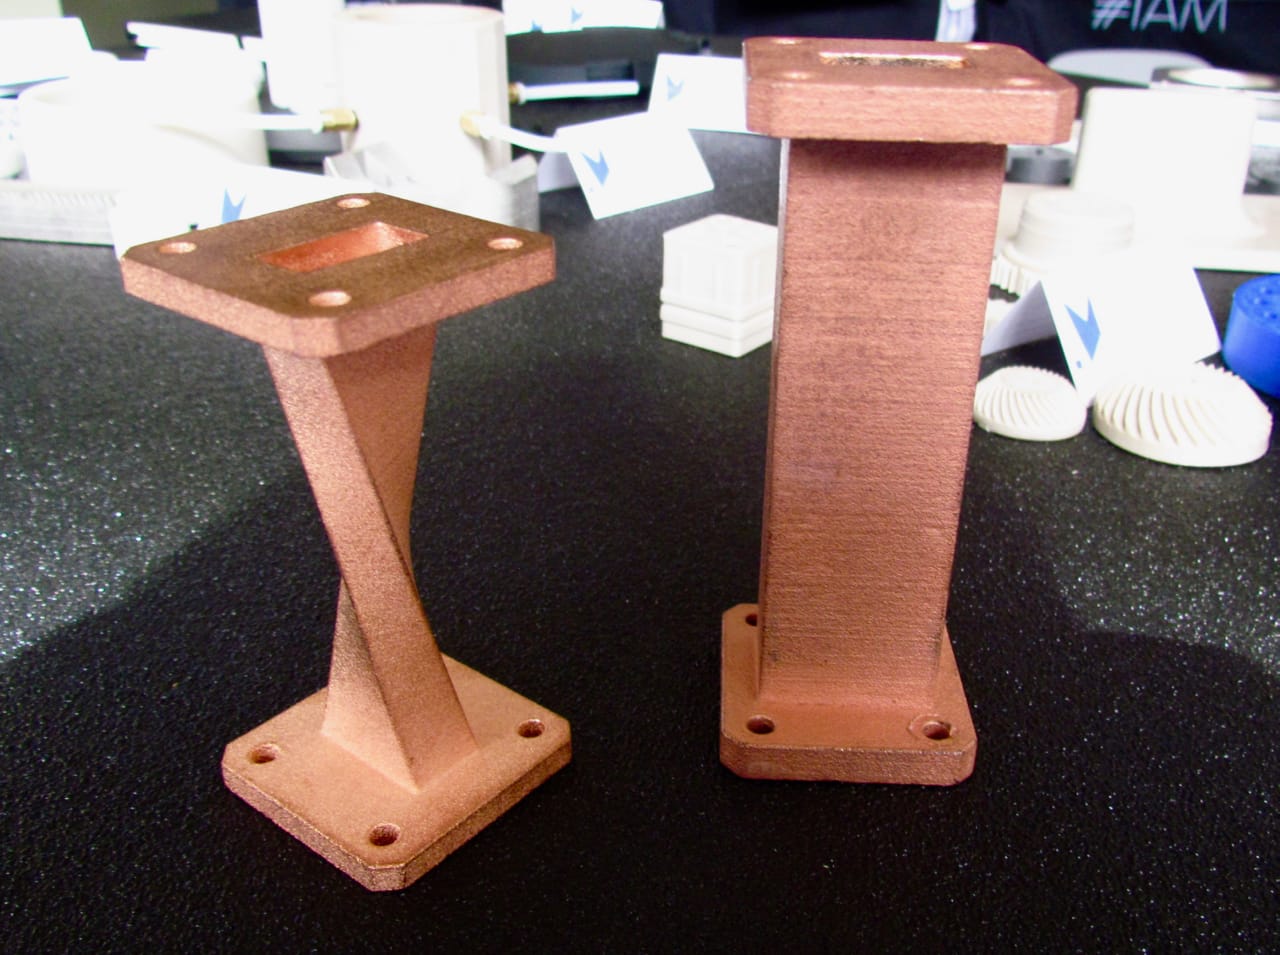  Copper-plated 3D printed plastic parts by Roboze 